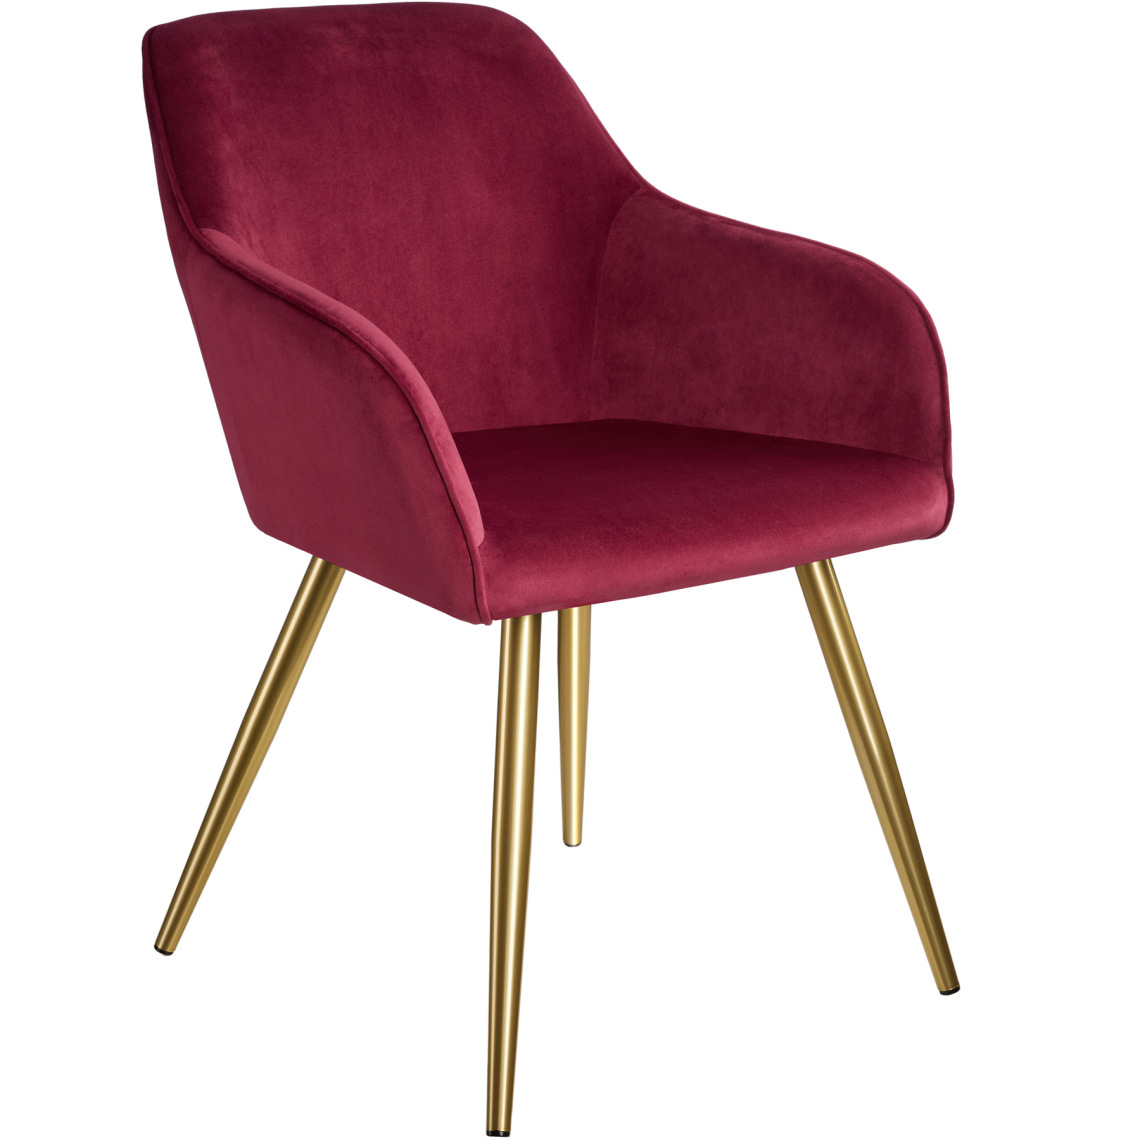 Tectake - Chaise MARILYN Effet Velours Style Scandinave - bordeaux/or - Chaises